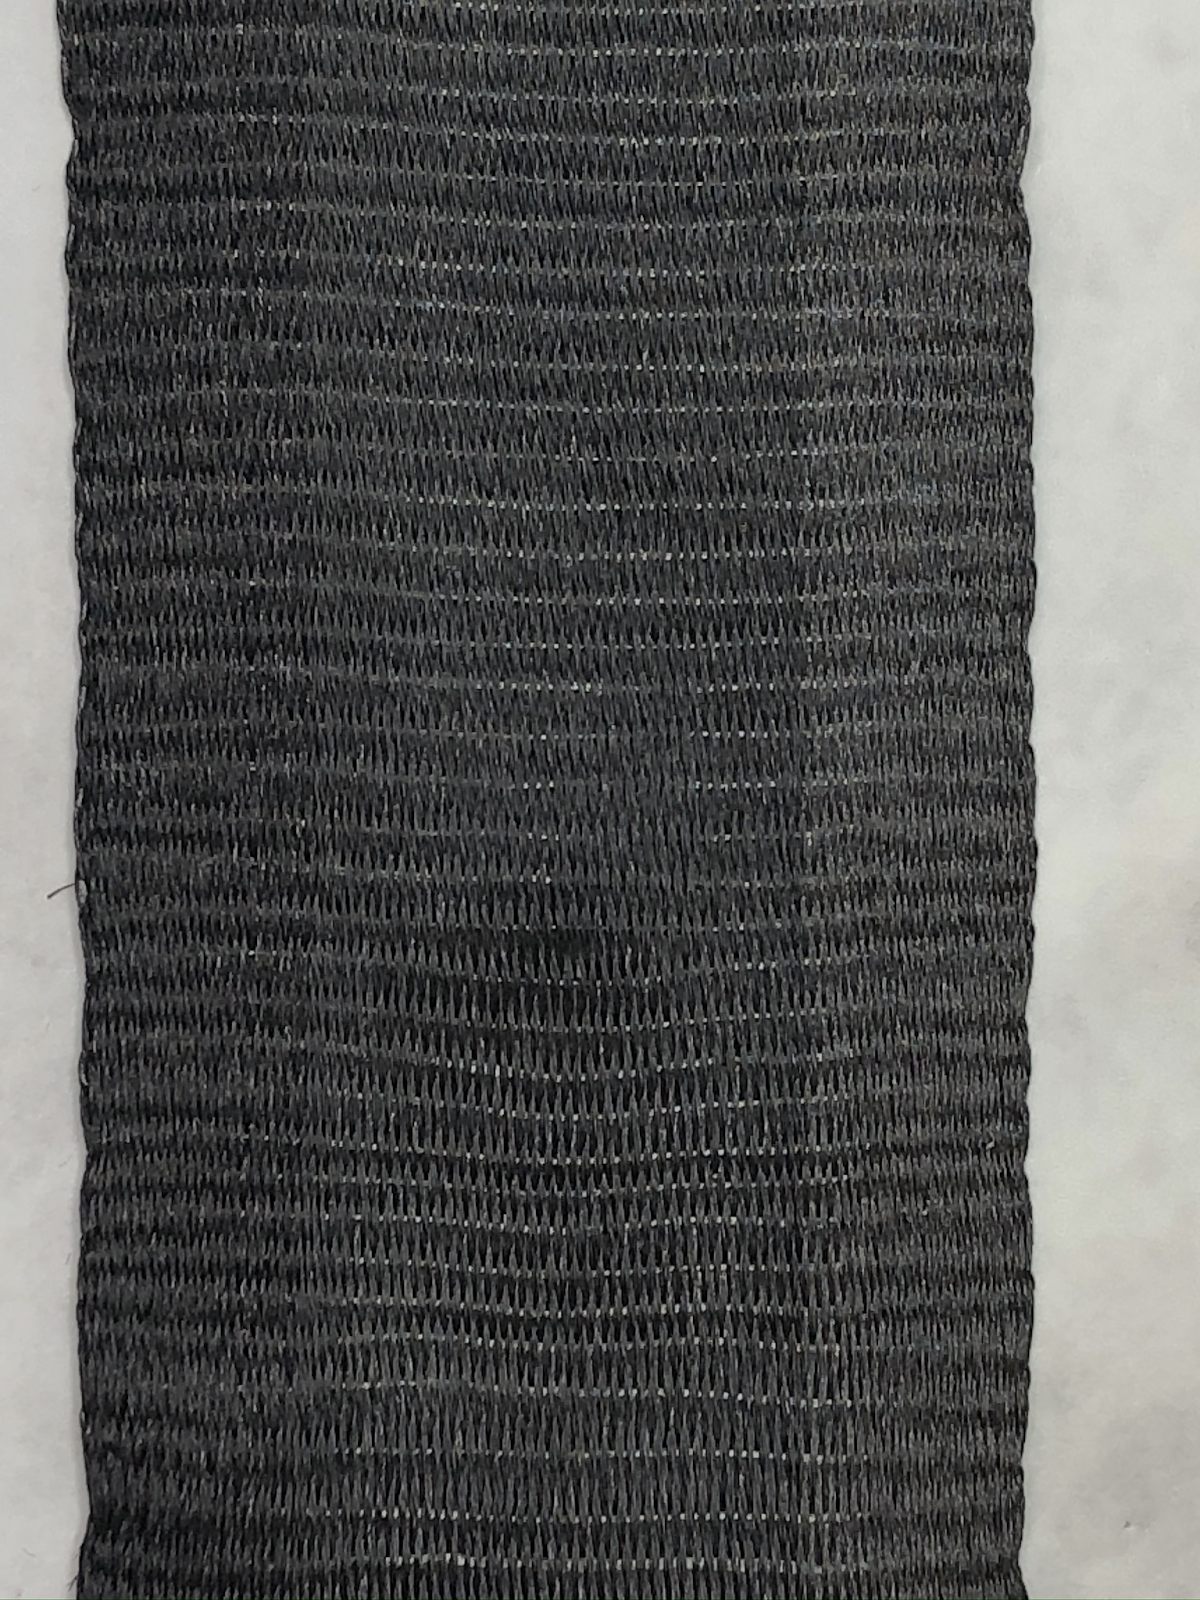 Plain Weave made from Galvorn CNT yarn